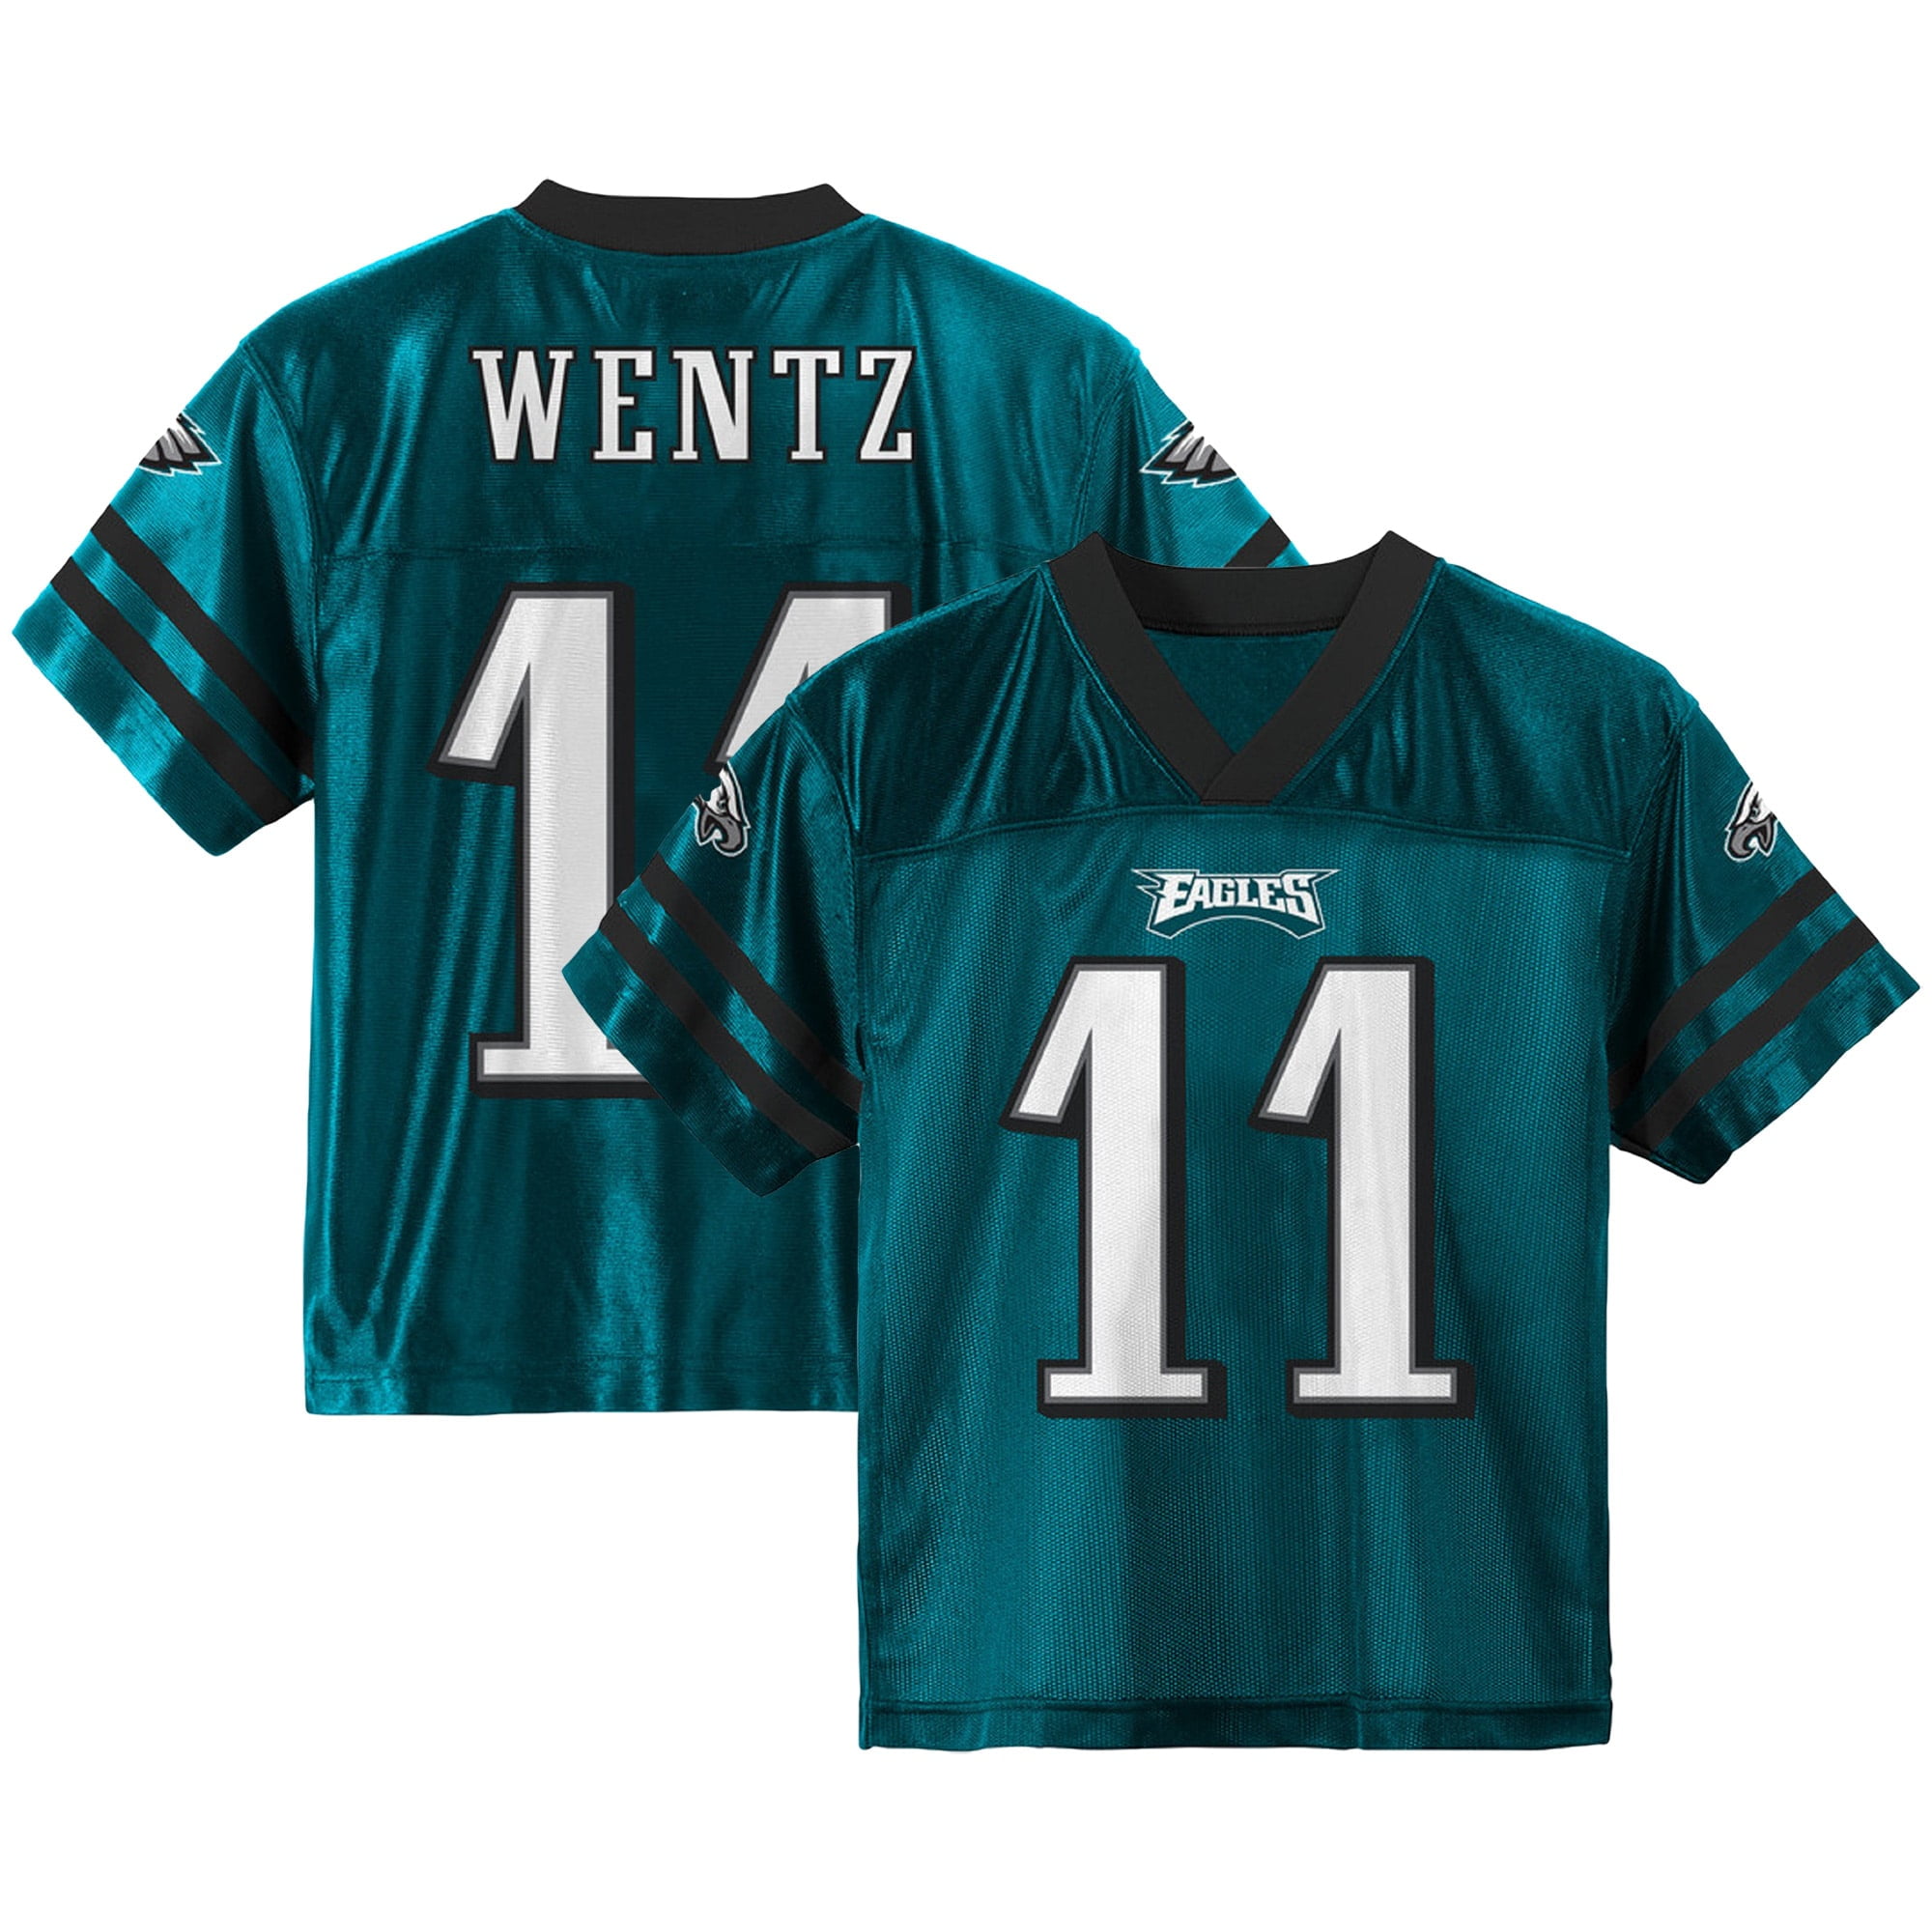 3t eagles jersey